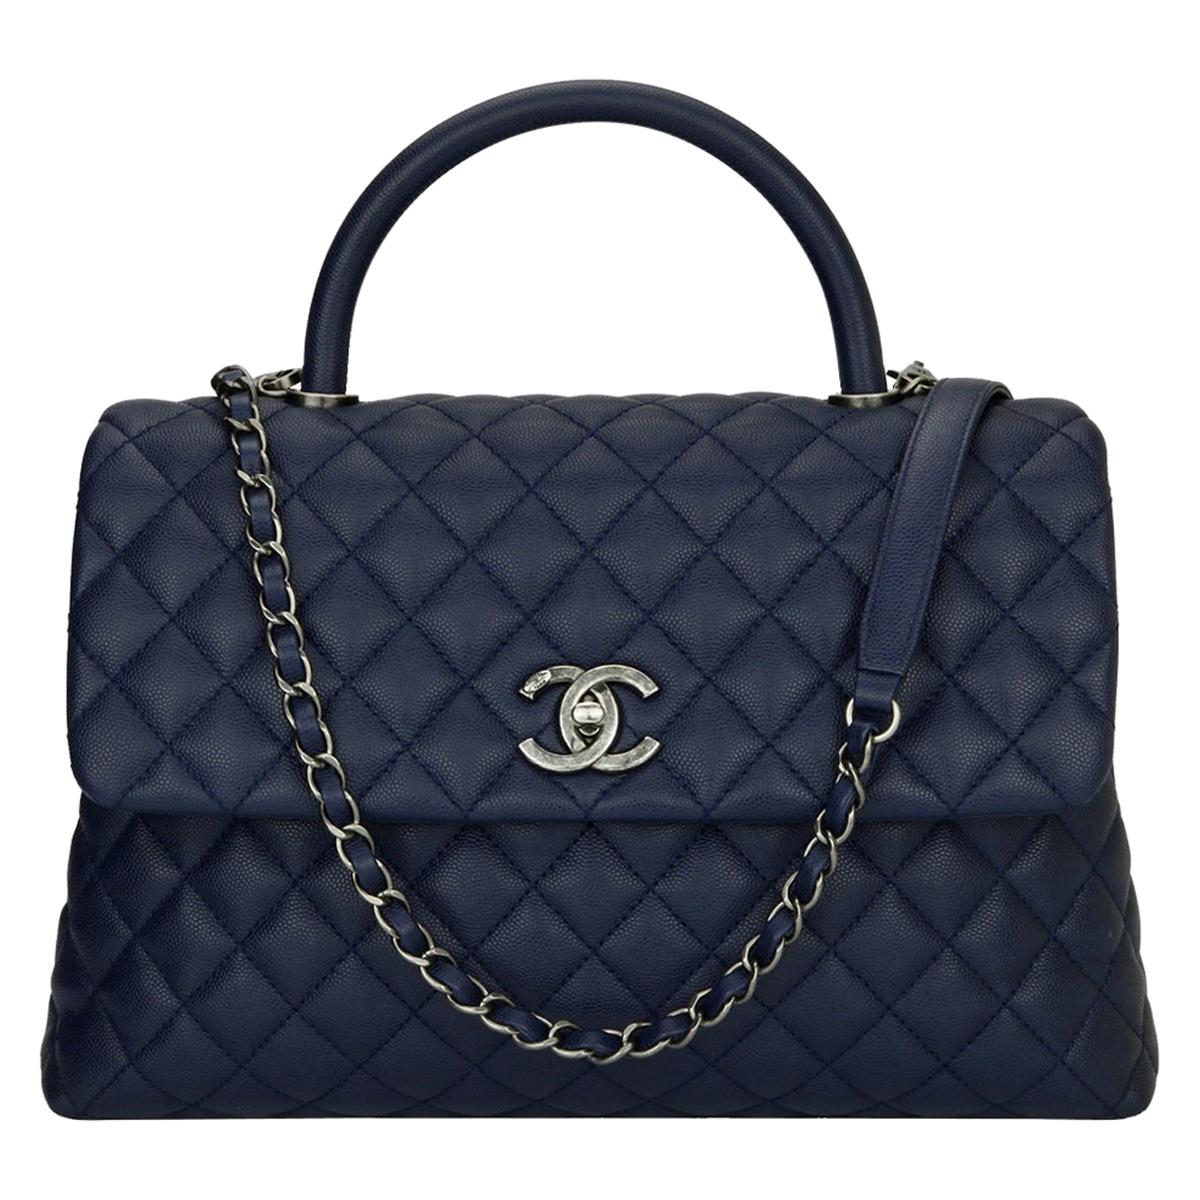 Chanel Coco Handle Bag Large Navy Caviar with Ruthenium Hardware 2017